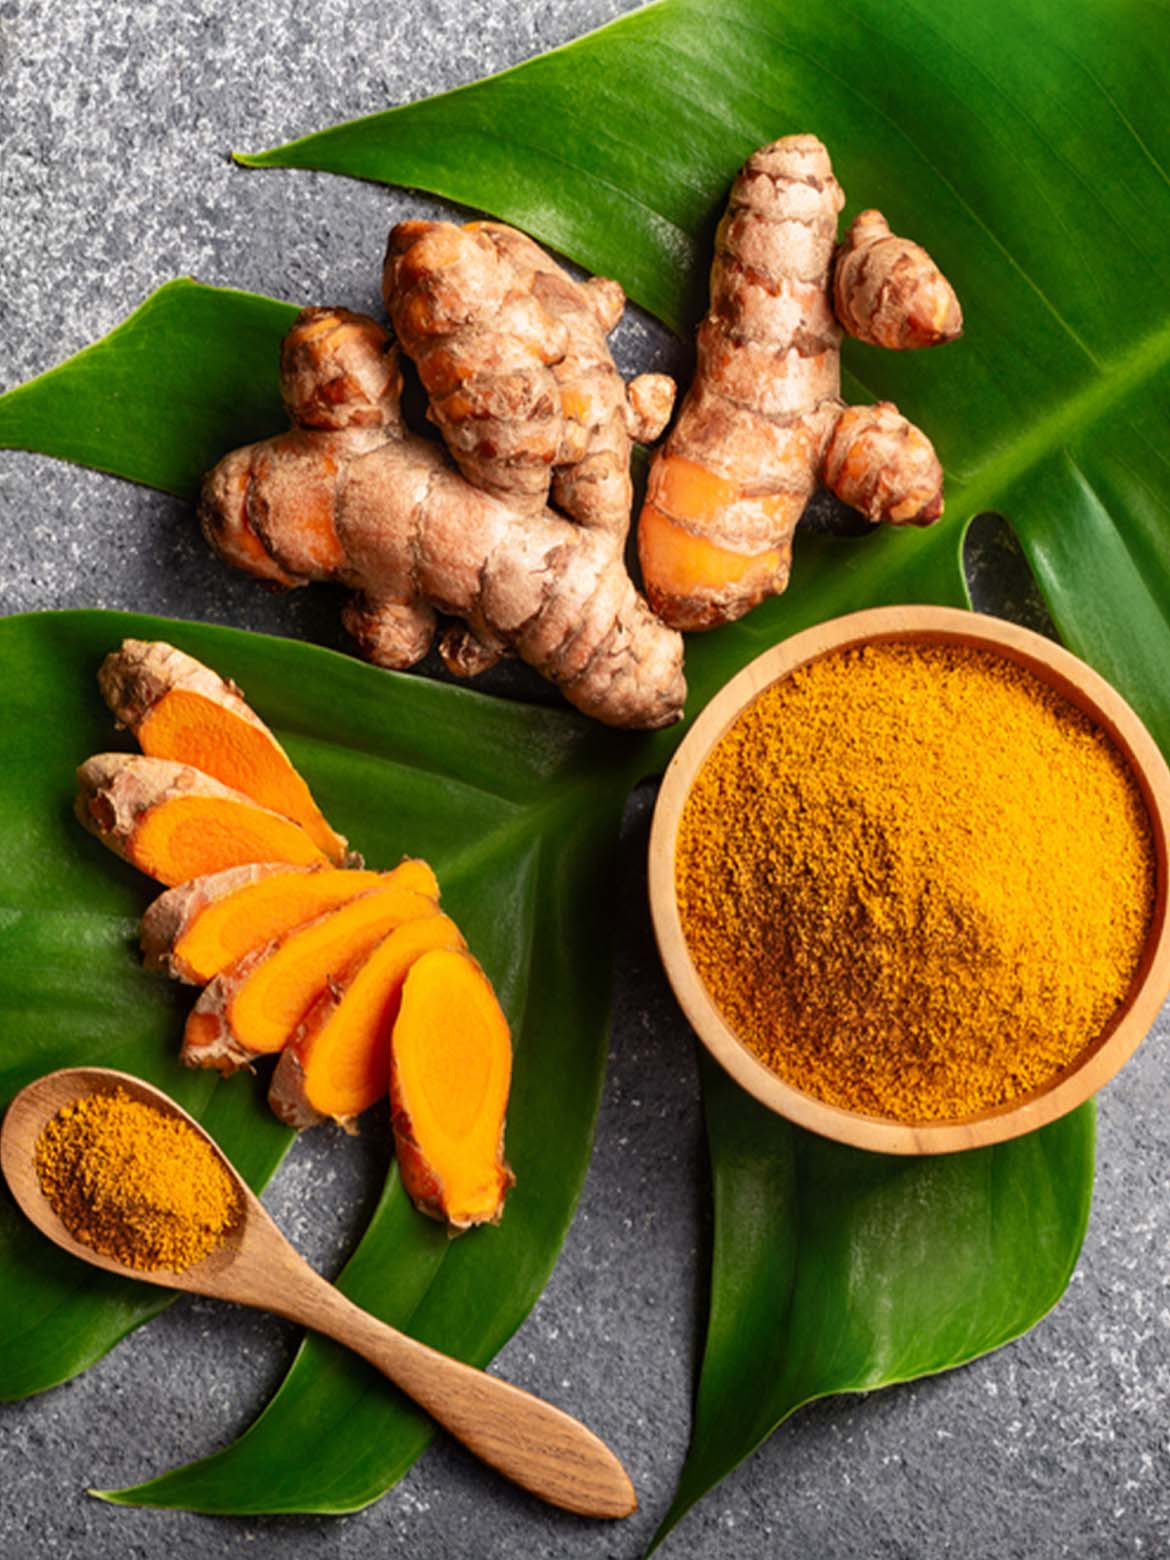 turmeric as good natural sources to stop inflammation